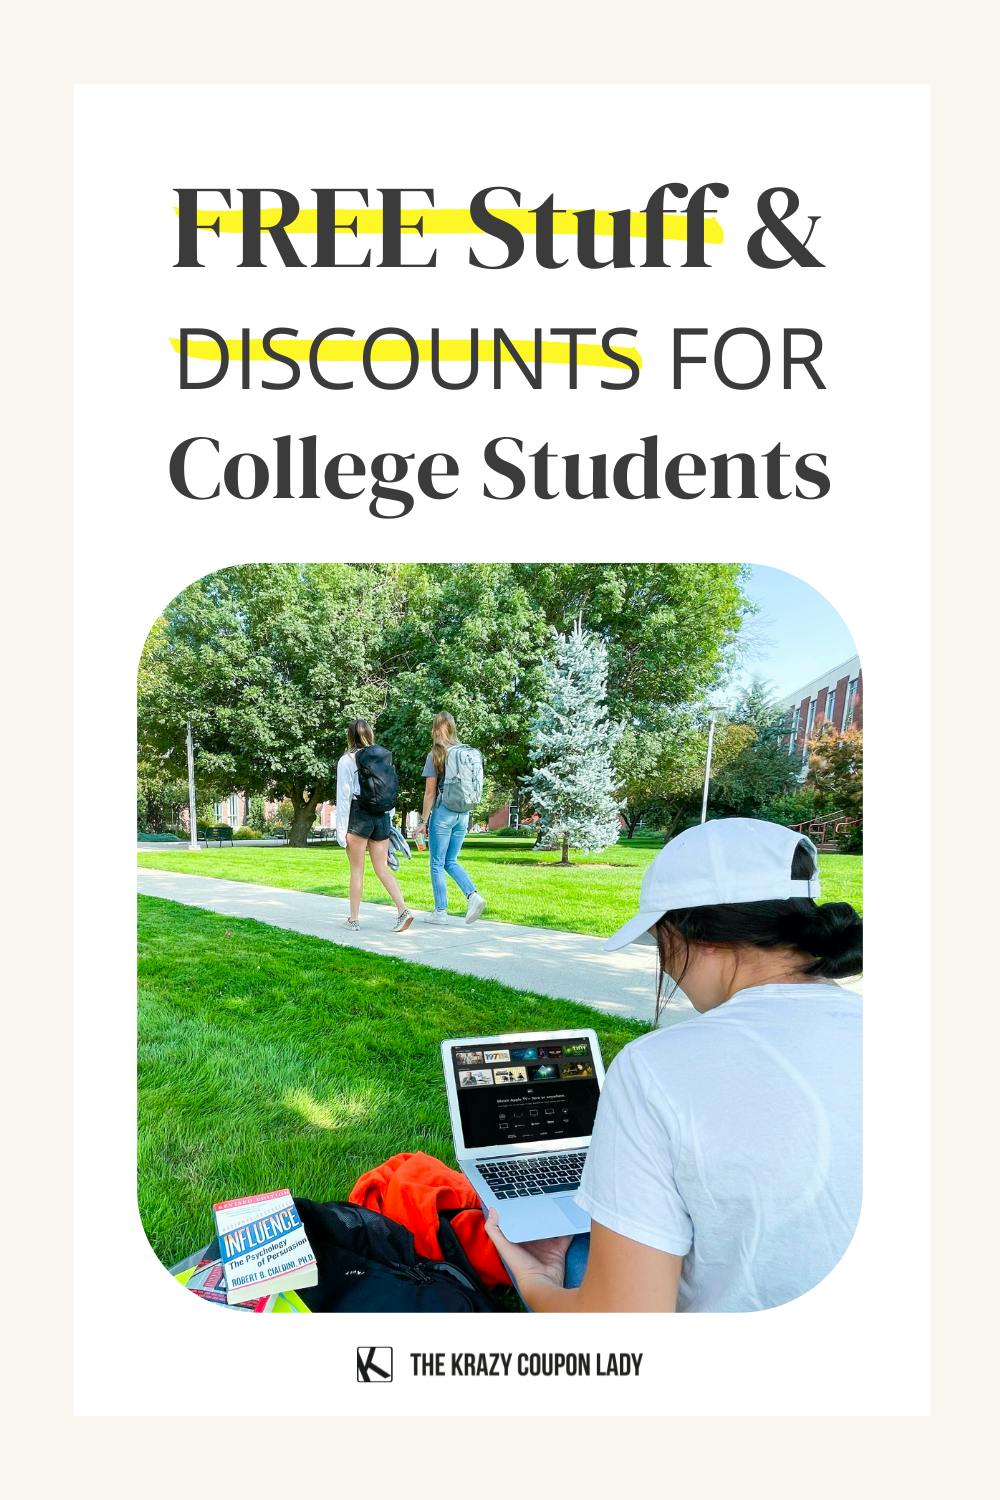 Free Stuff for College Students: 26 Discounts and Freebies